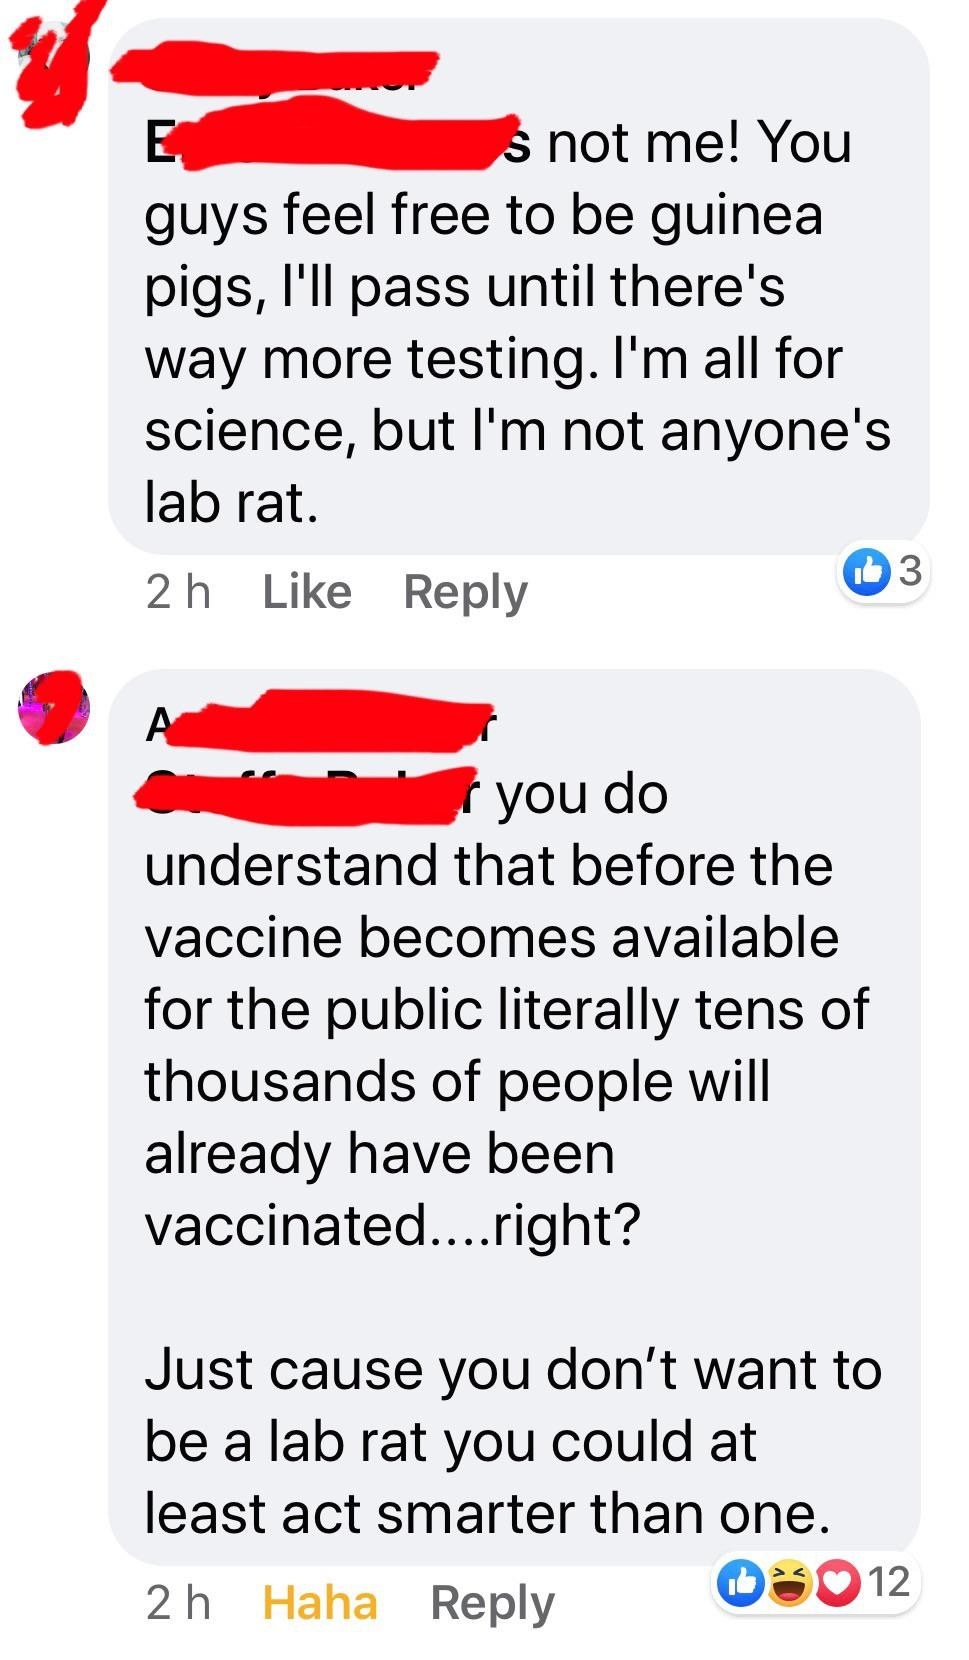 &quot;You guys feel free to be guinea pigs; i&#x27;ll pass until there&#x27;s way more testing&quot; Response: You do understand that before the vaccine becomes available for the public literally tens of thousands of people will already have been vaccinated, right?